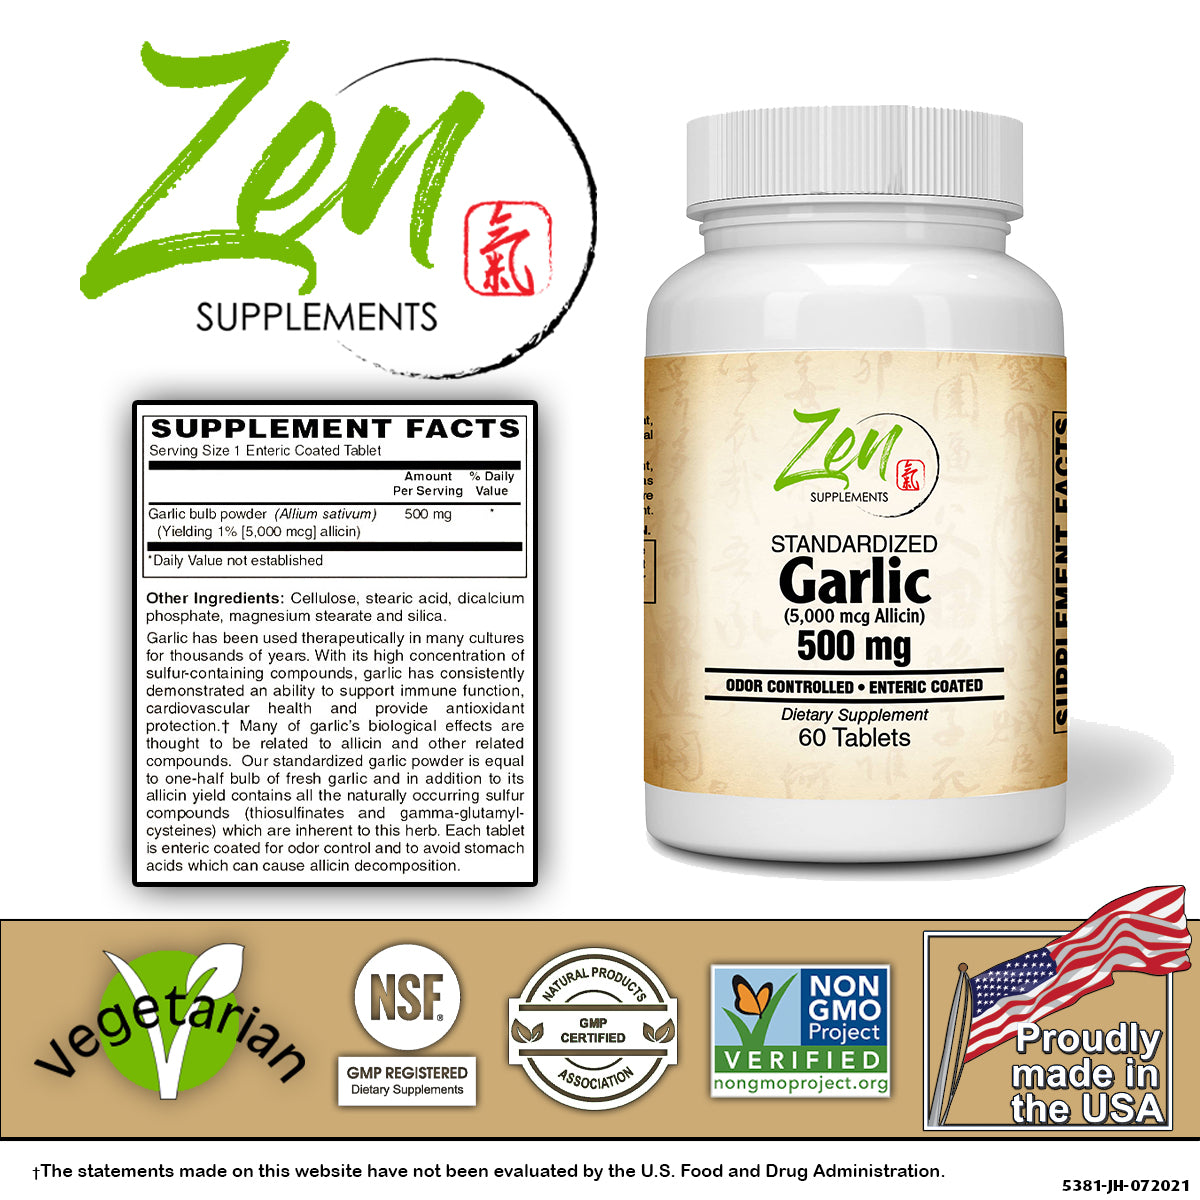 Zen Supplements - Garlic 500Mg Extract - Enteric Coated - Supports Cardiovascular Health, Promotes a Healthy Inflammatory Response, Healthy Blood Pressure & Cholesterol Levels 60-Tabs